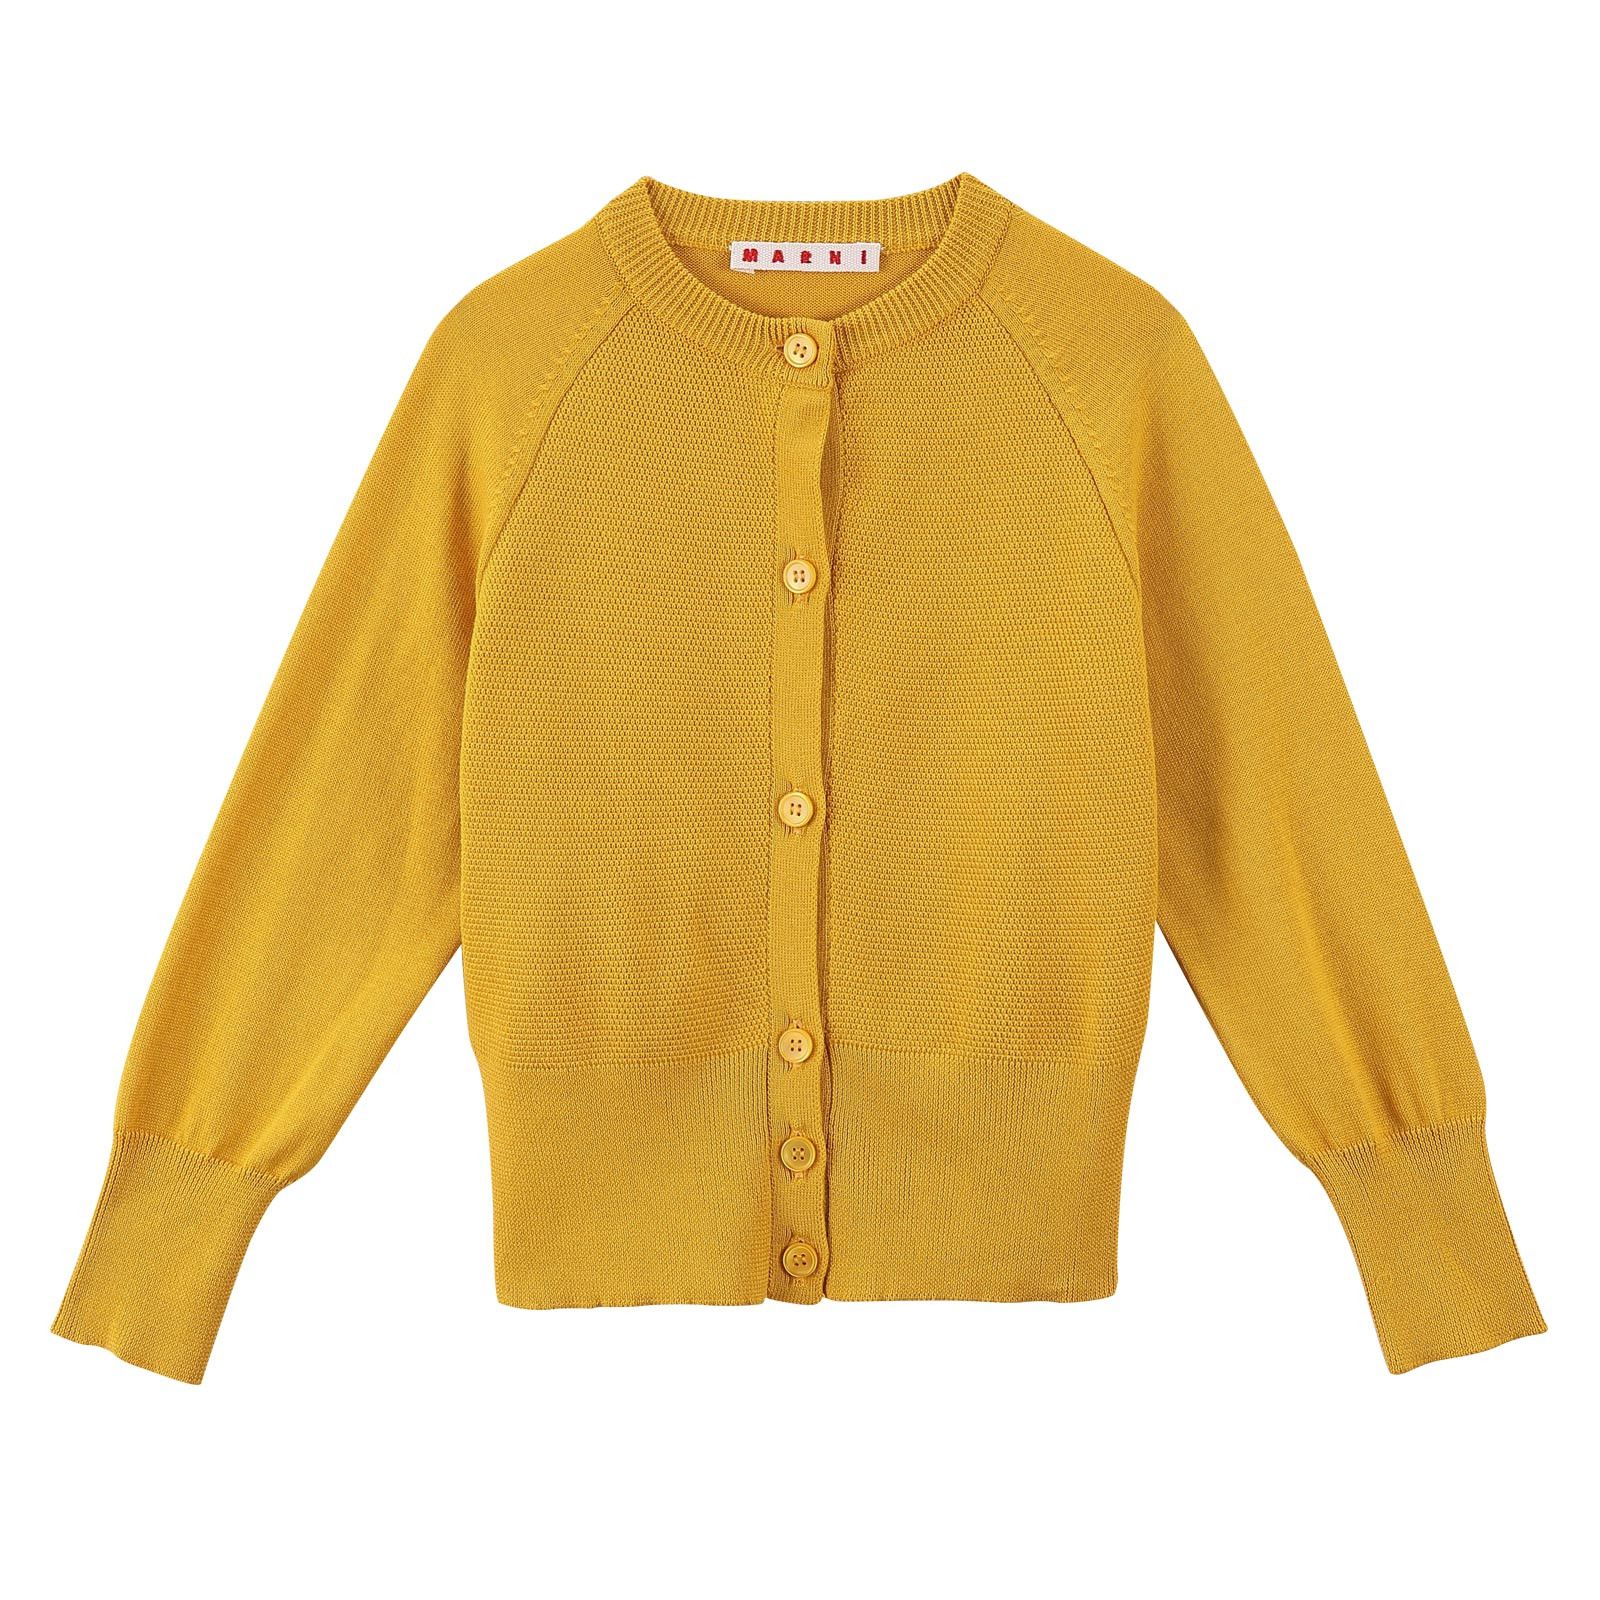 Girls Yellow Knitted Cotton Cardigan With Ribbed Cuffs - CÉMAROSE | Children's Fashion Store - 1